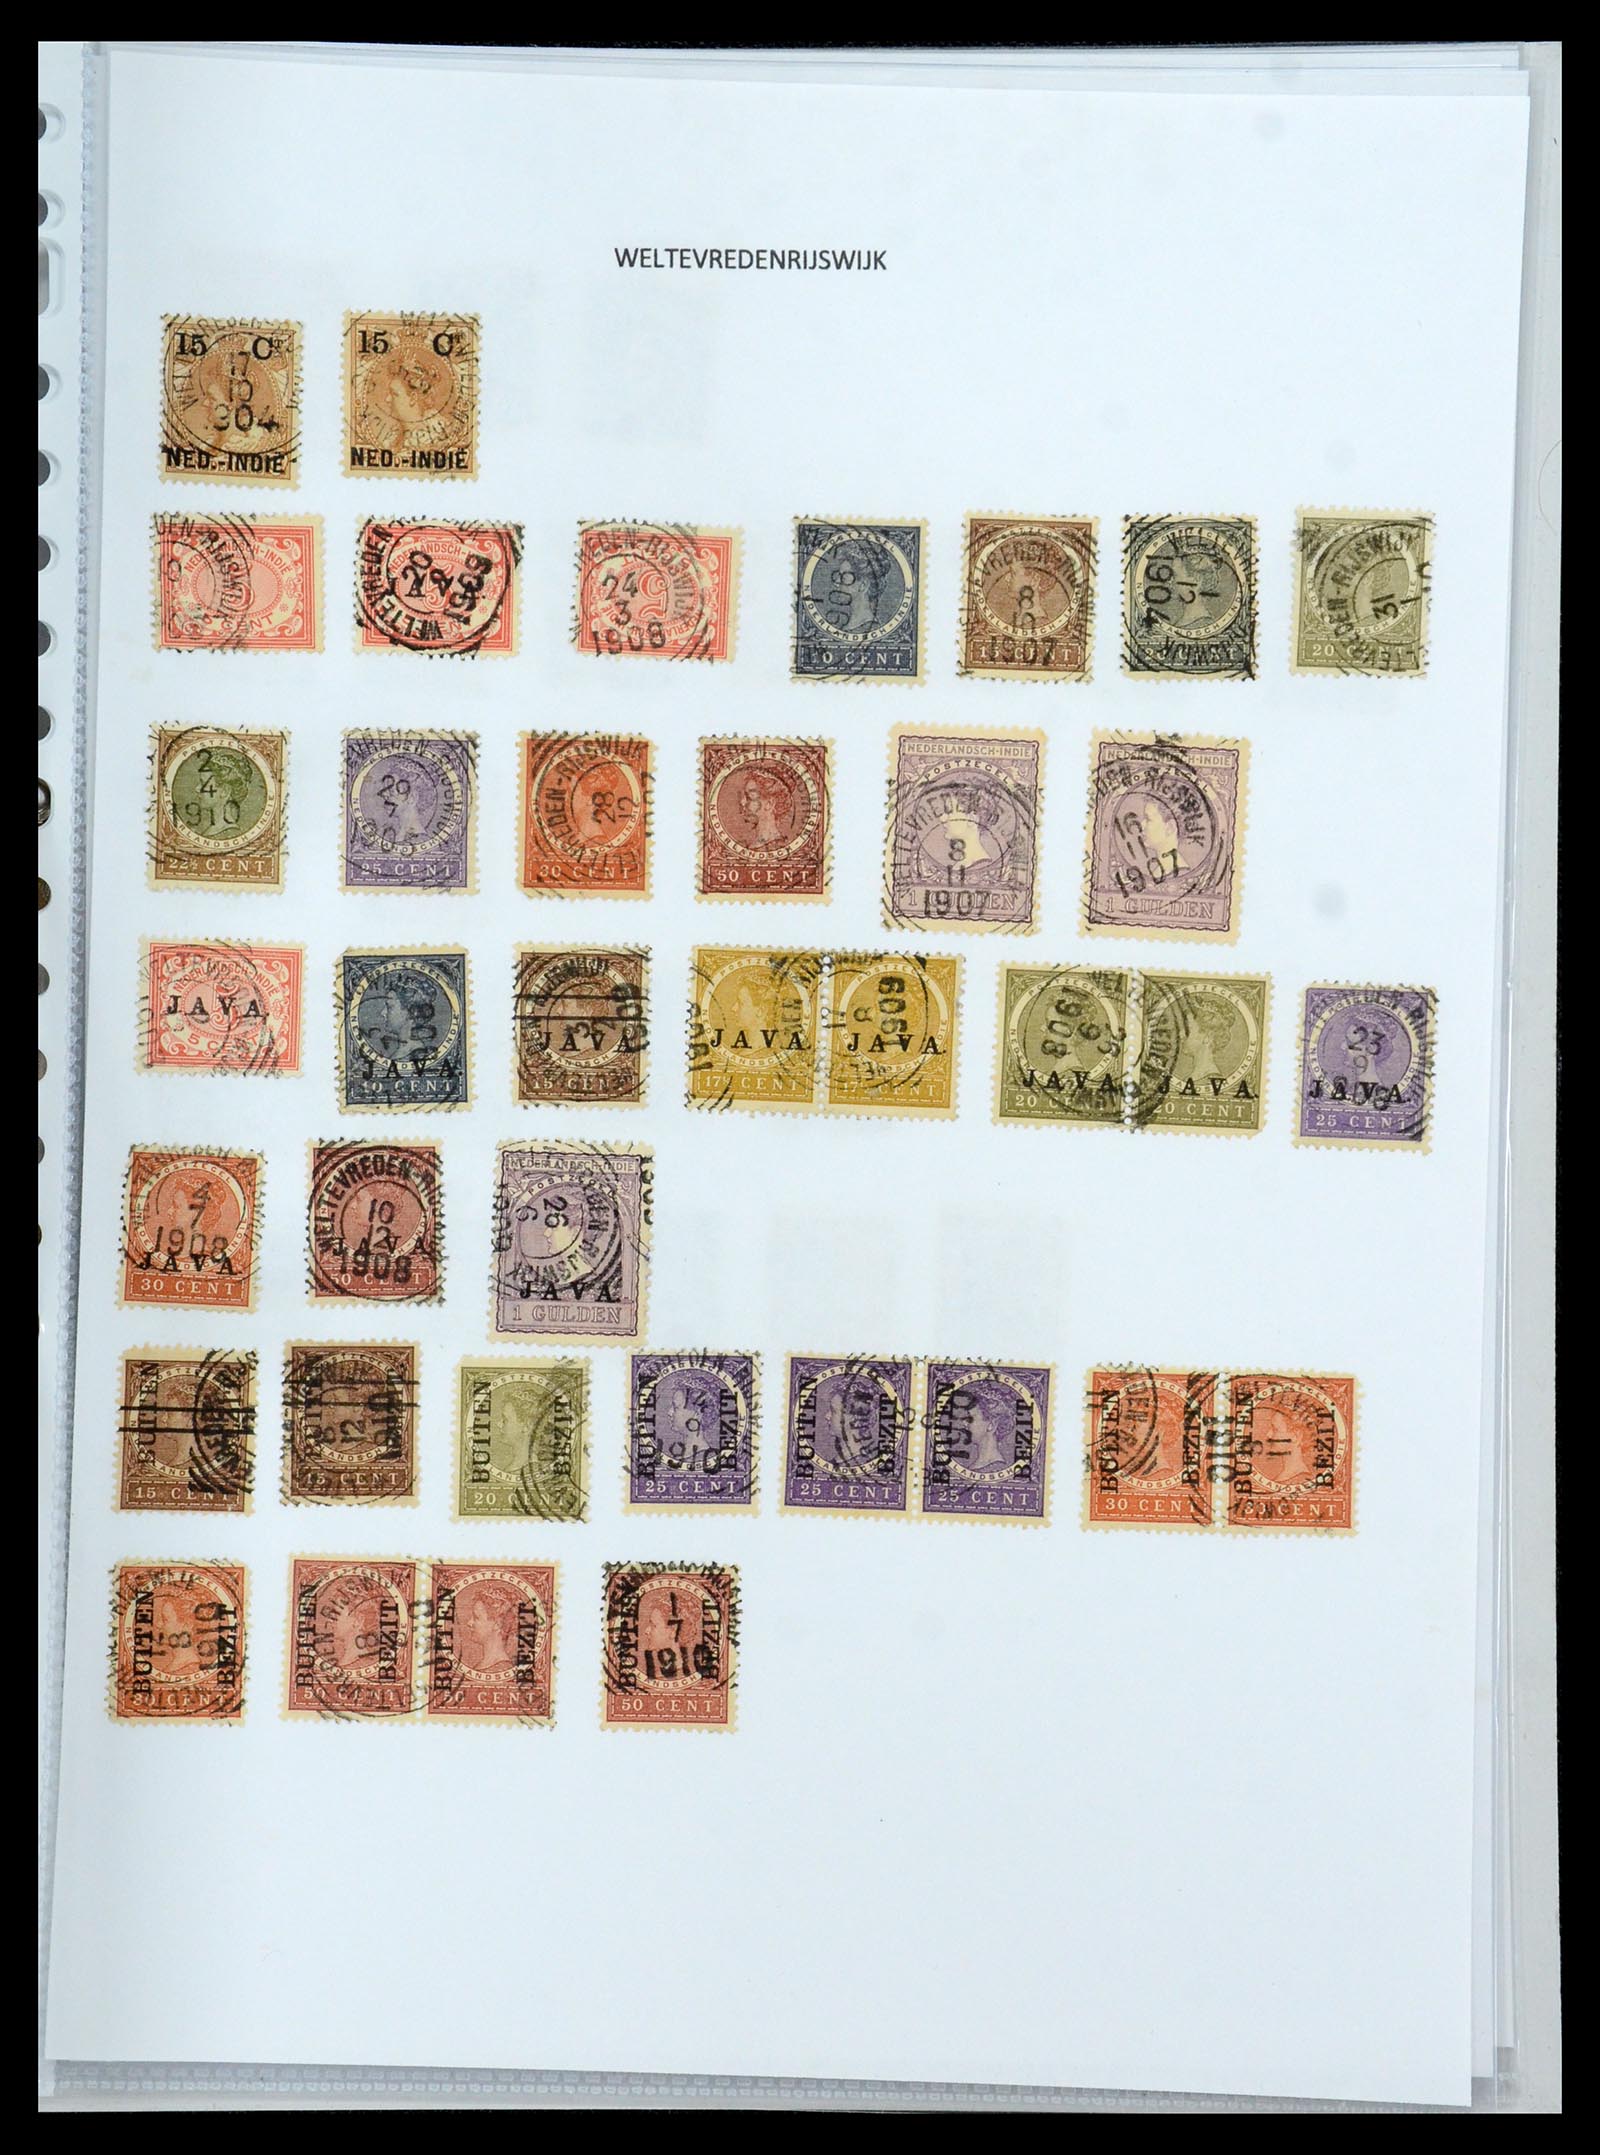 36432 221 - Stamp collection 36432 Dutch east Indies square cancels.